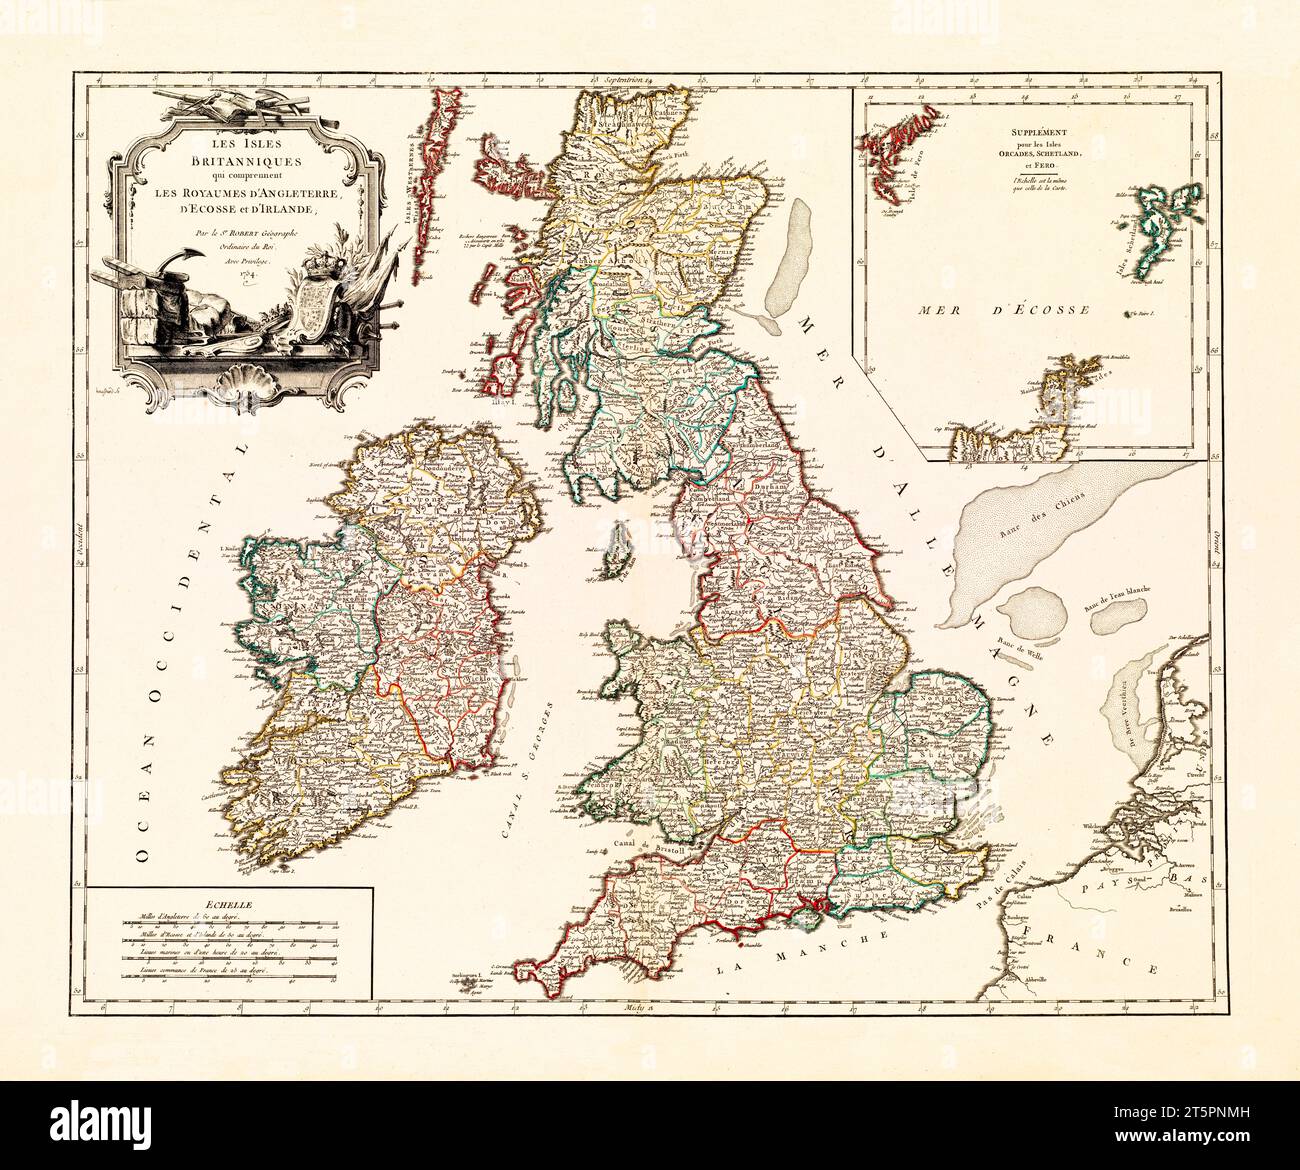 Old map of British Isles. By De Vaugondy, publ. in 1754 Stock Photo